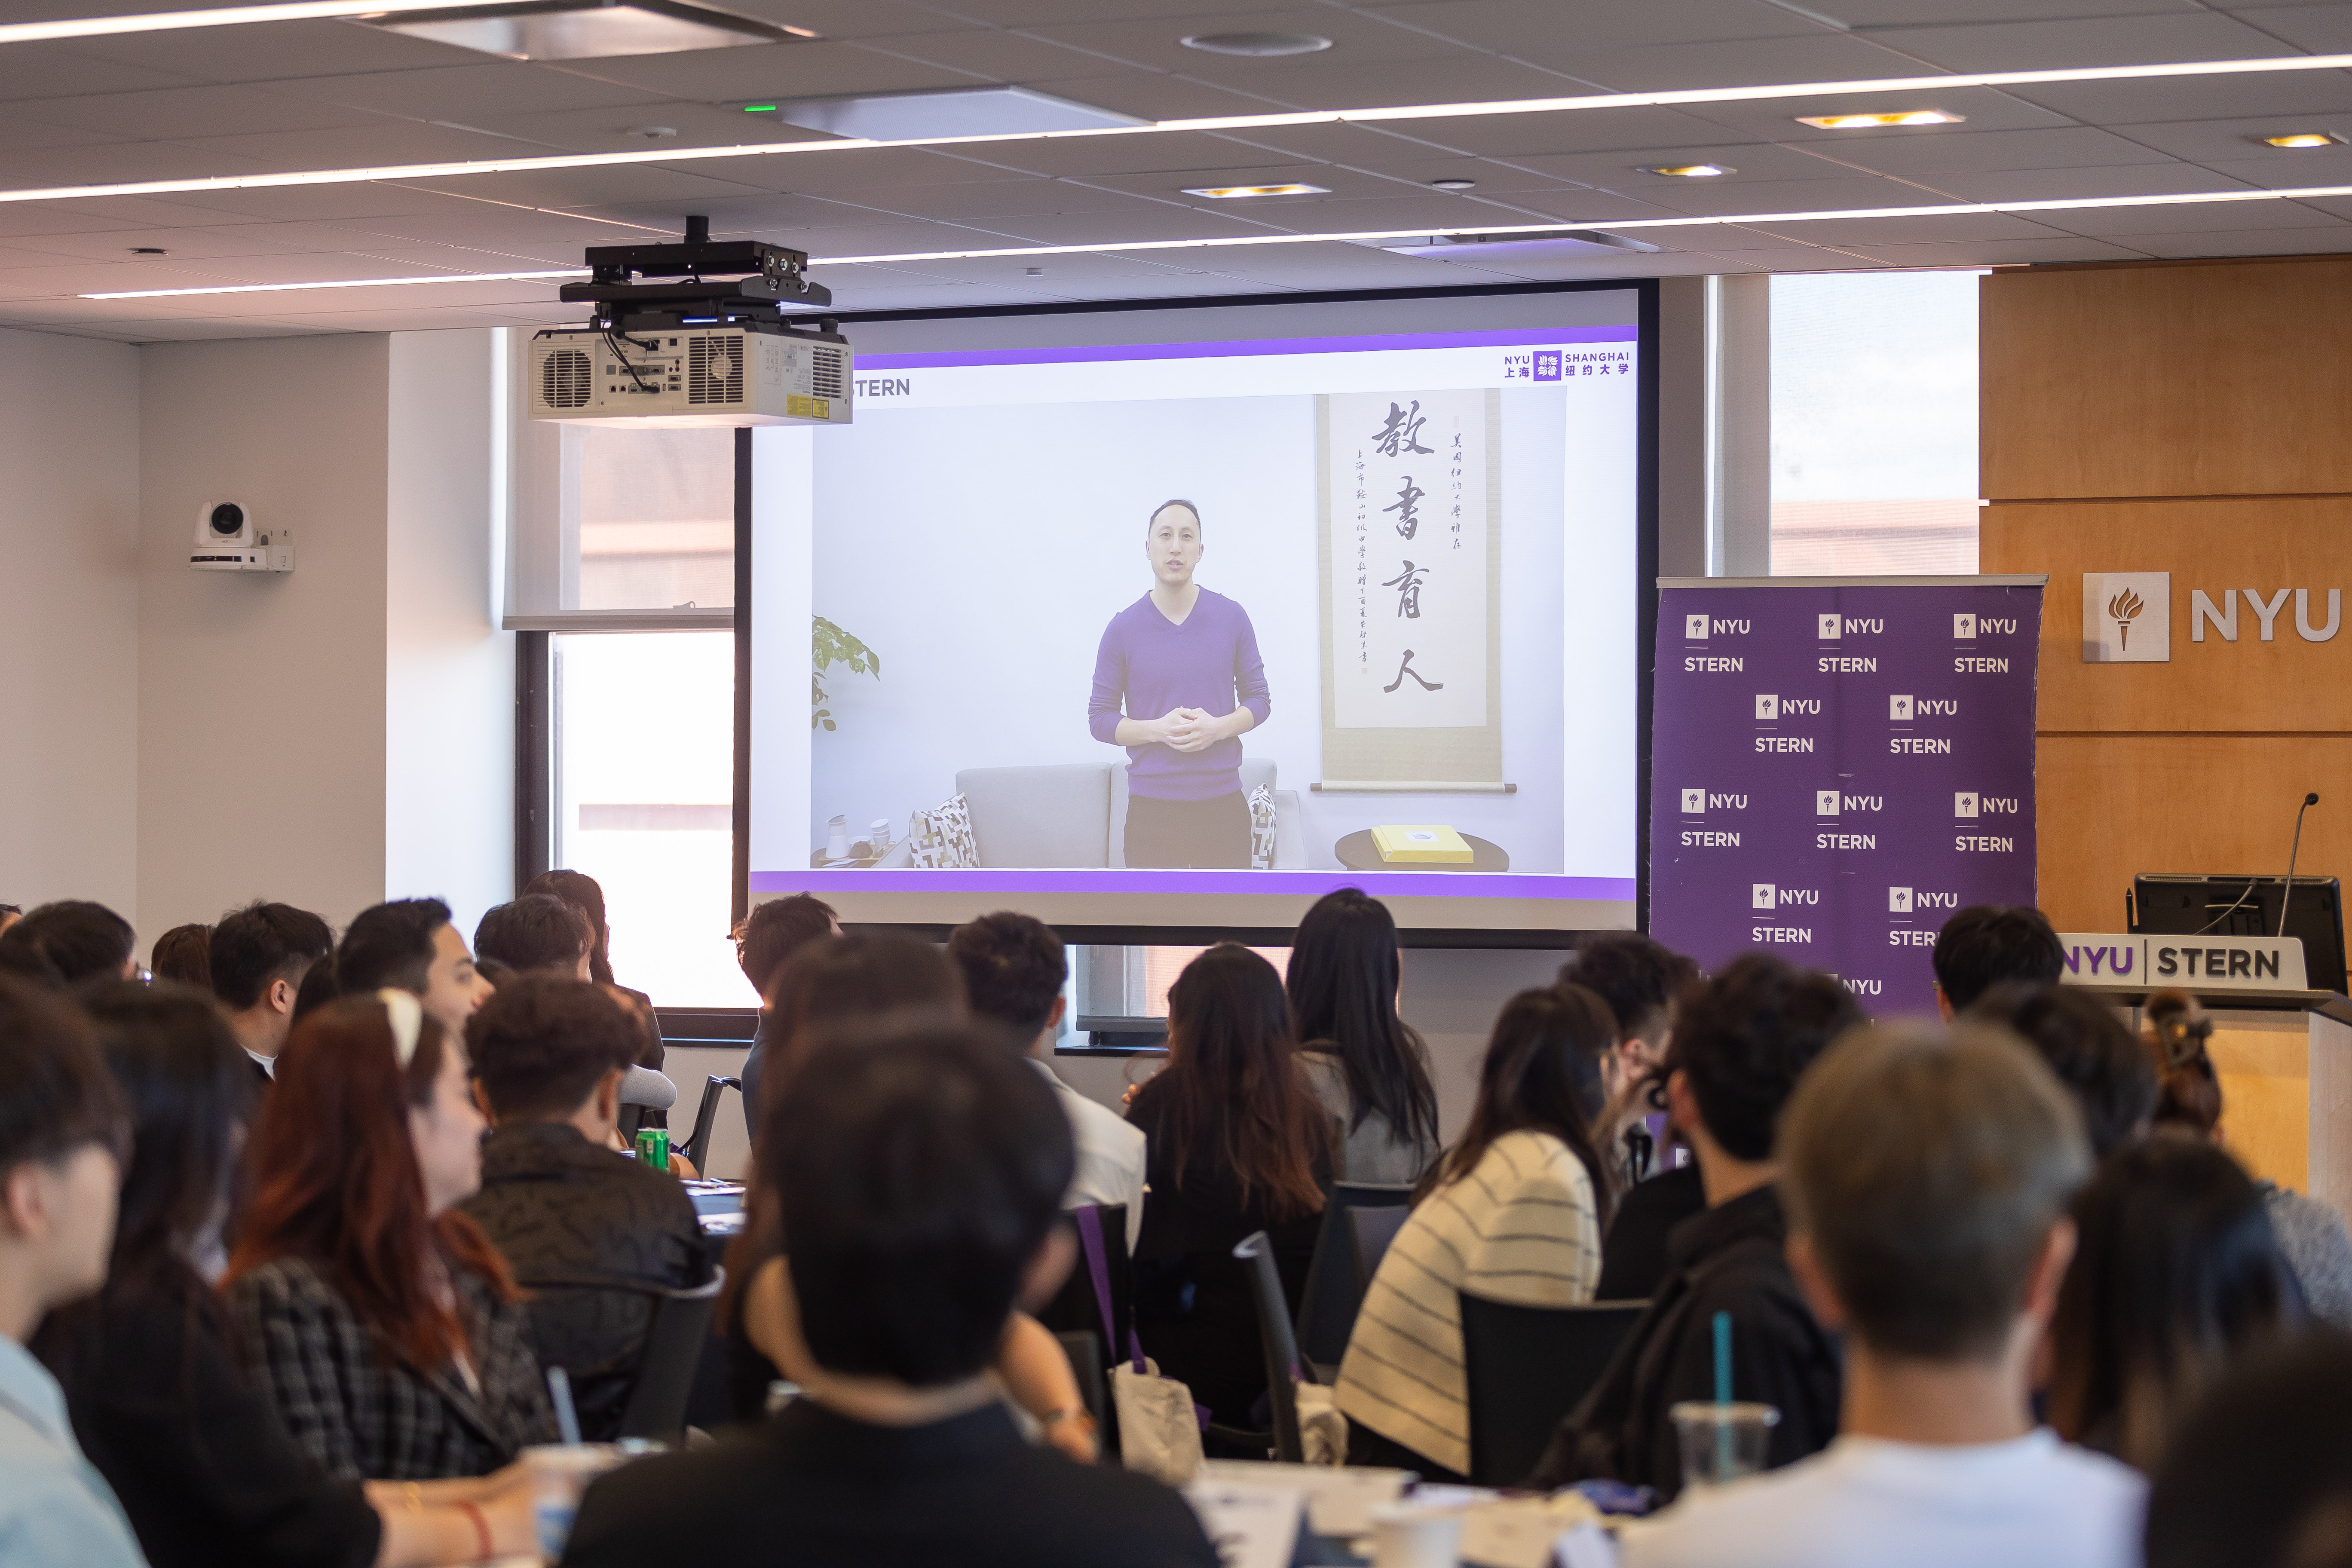 Eric Mao, Dean of Graduate and Advanced Education at NYU Shanghai, joining via video address from Shanghai